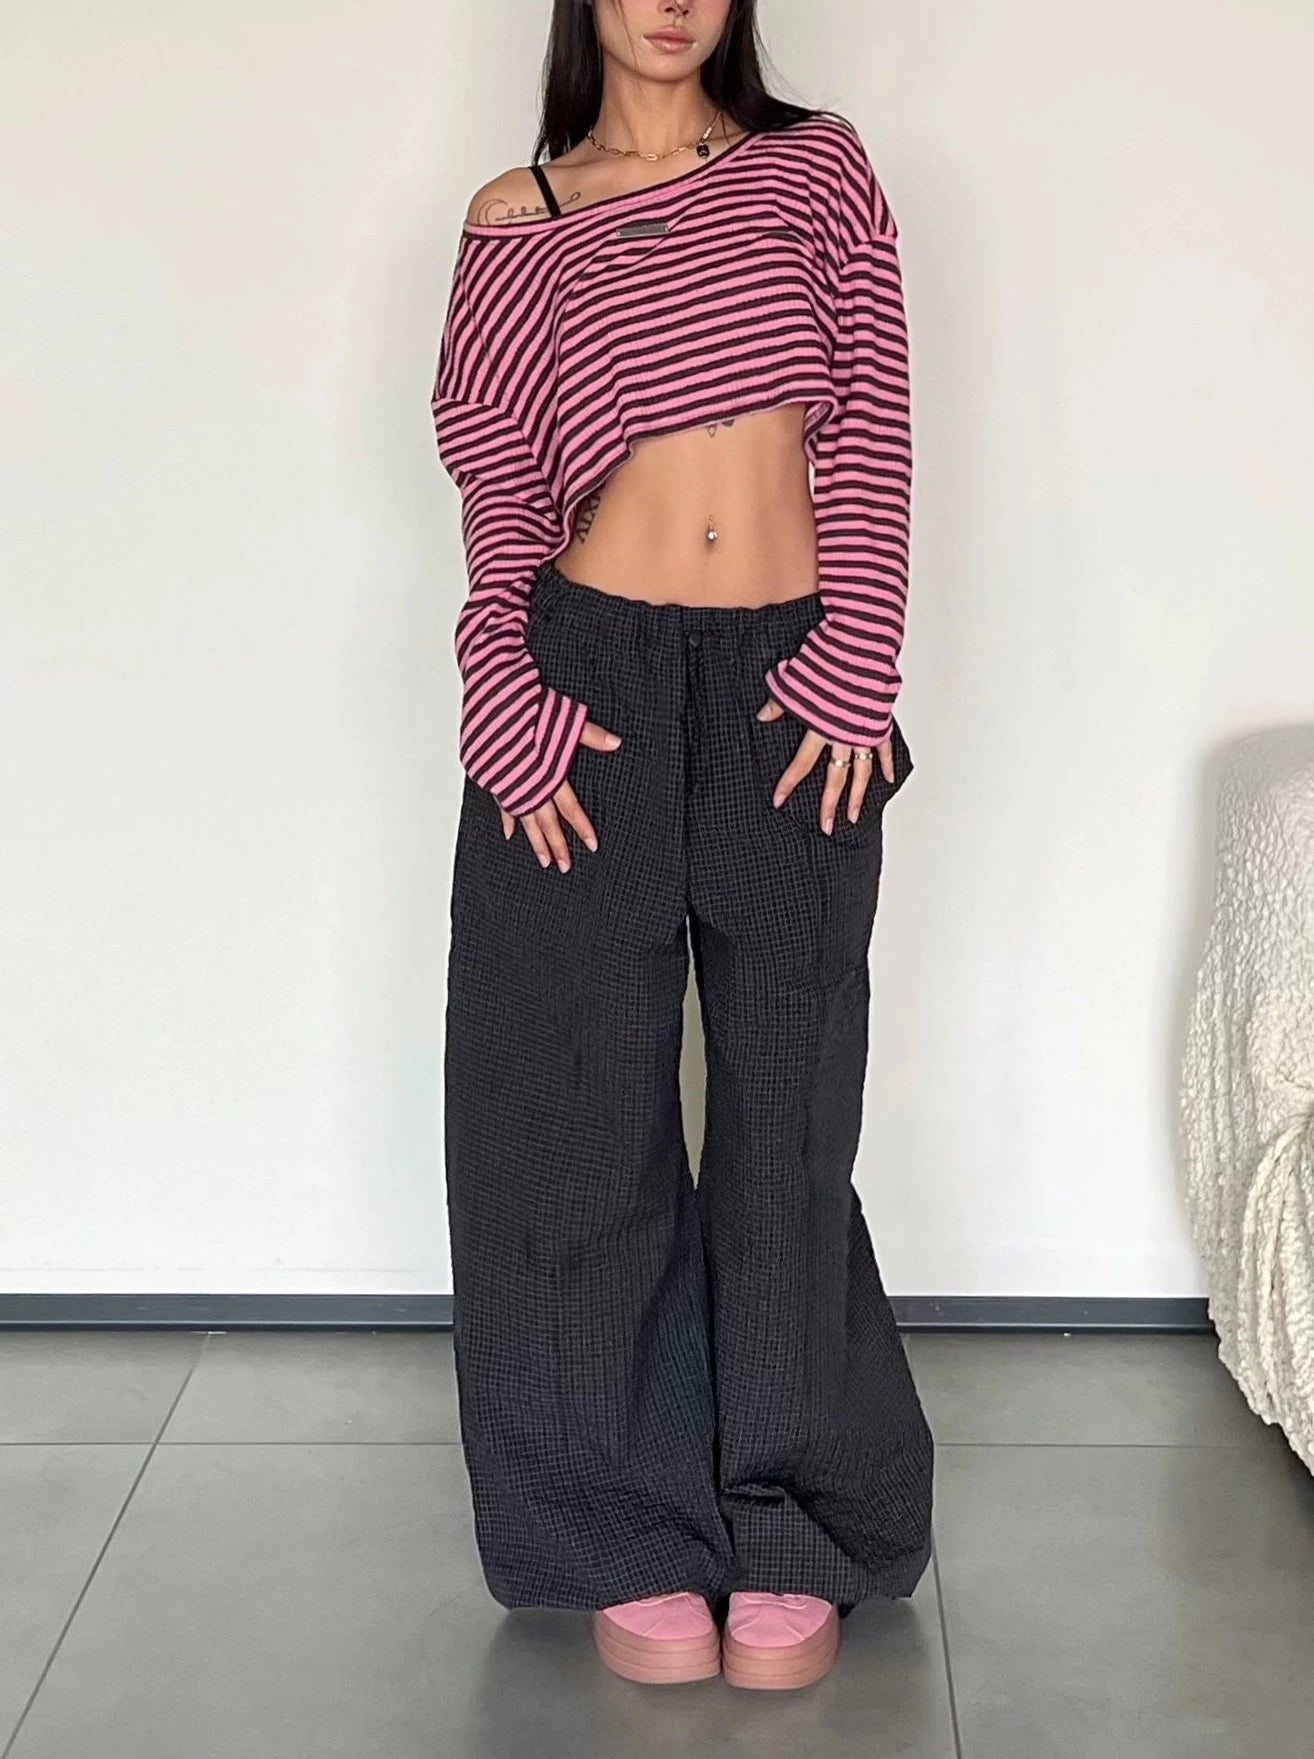 LaPose Fashion - Dillan Striped Loose Top - Basic Tops, Crop Tops, Long Sleeve Tops, Off Shoulder Tops, Oversize Tops, Tops, Winter Edit